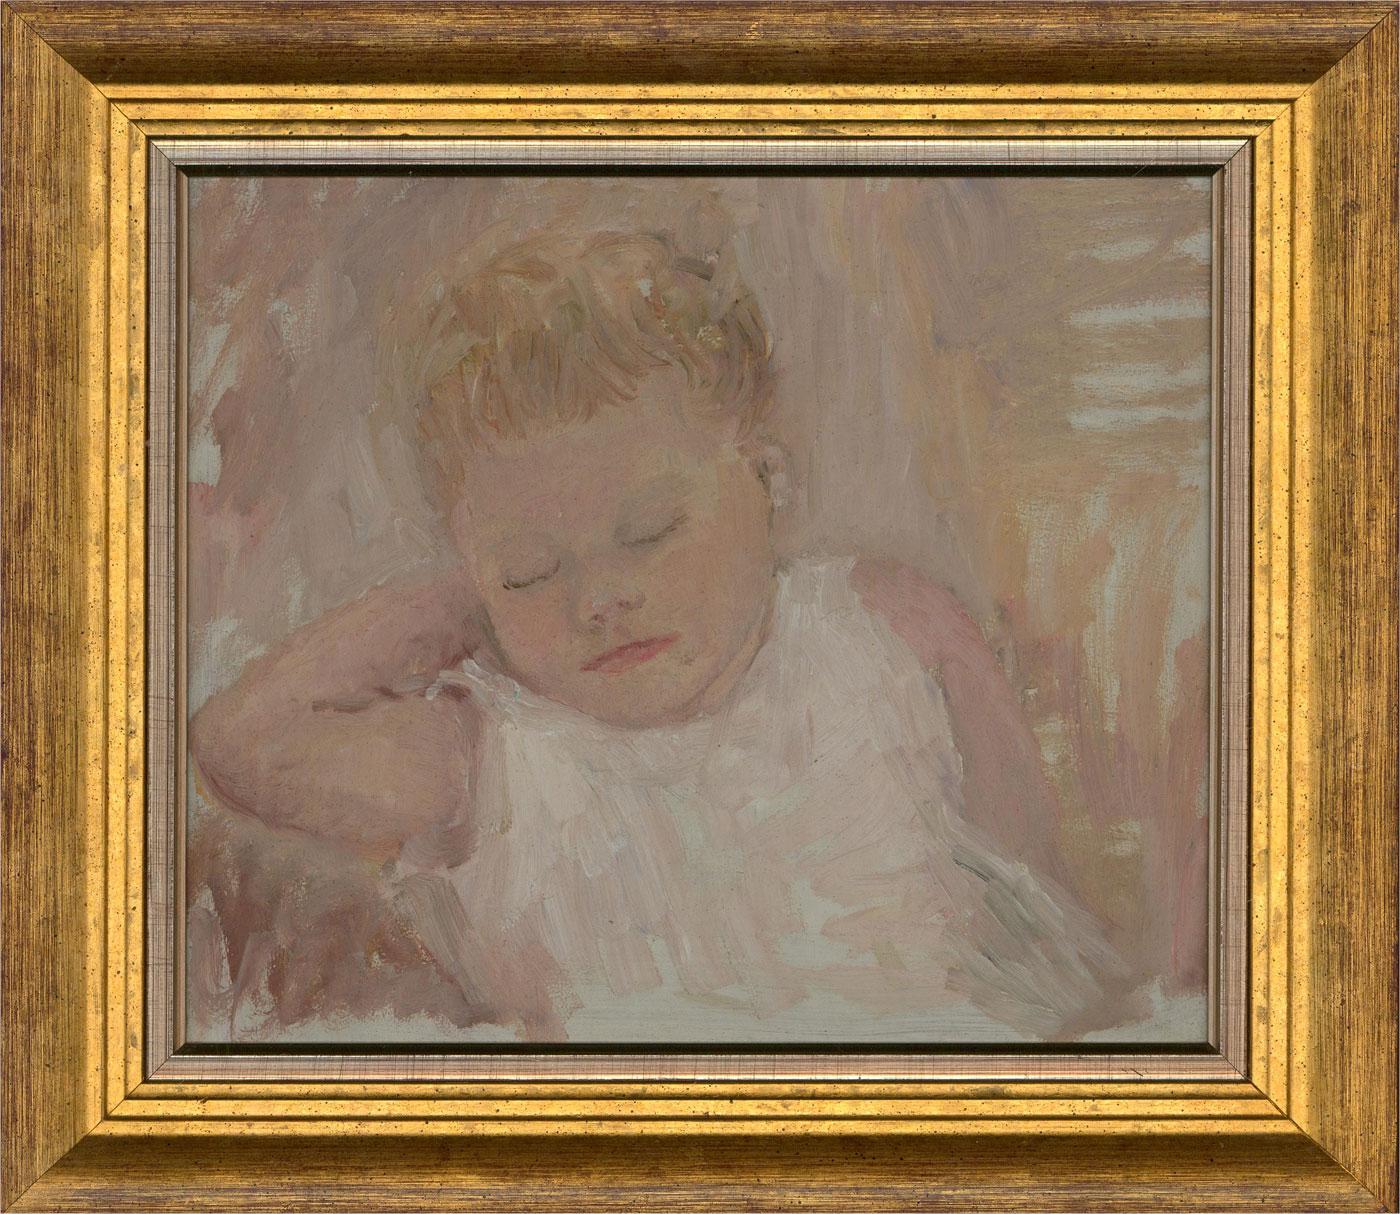 Unknown Figurative Painting - 20th Century Oil - Sleeping Child